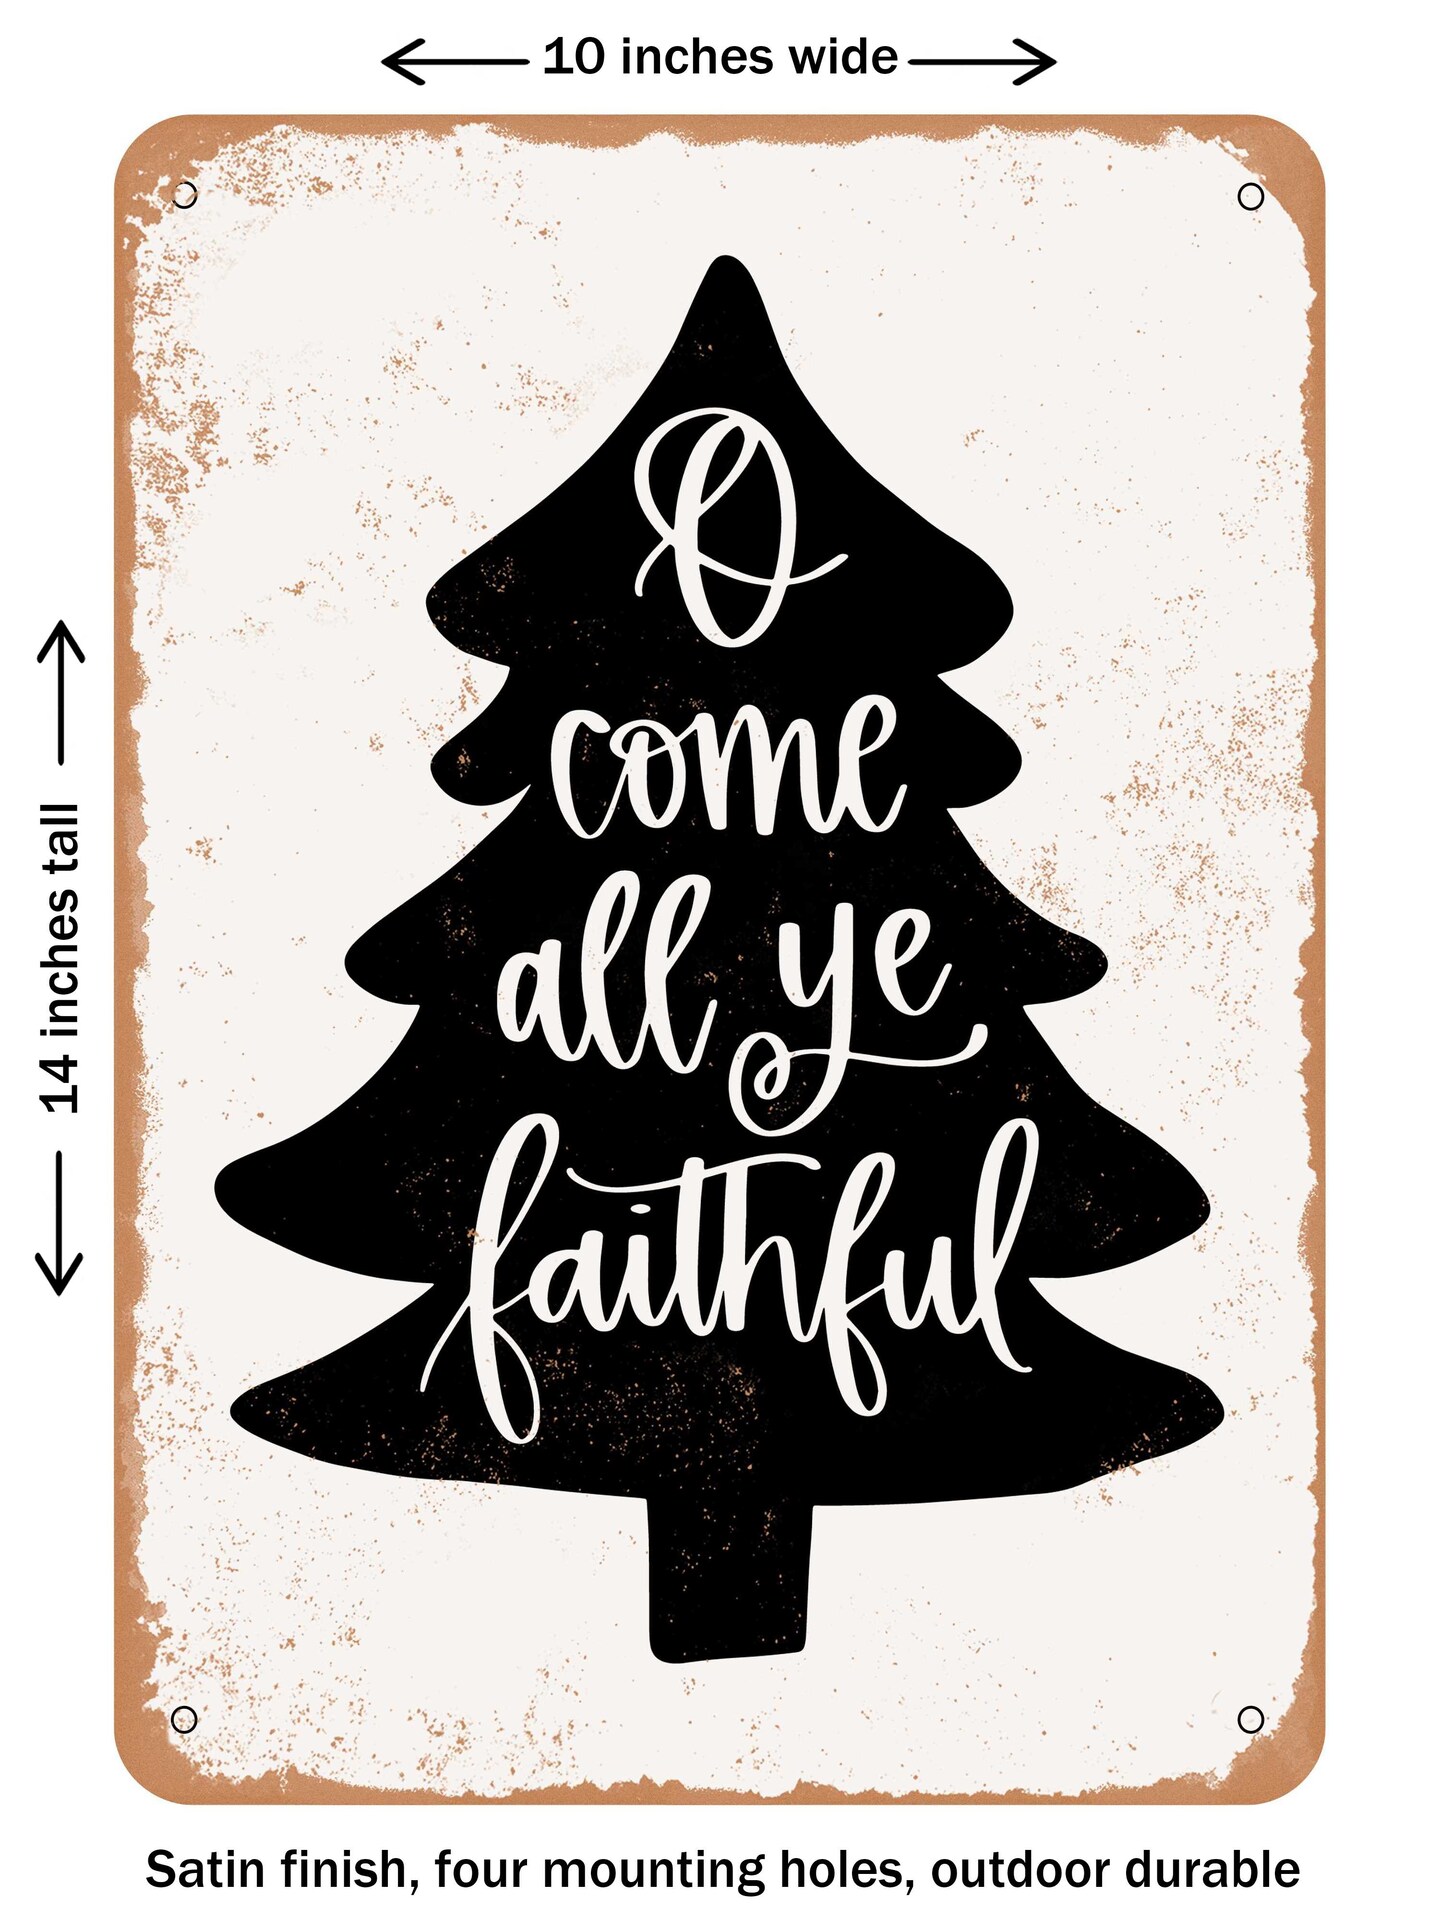 DECORATIVE METAL SIGN - O Come All Ye Faithful - Vintage Rusty Look